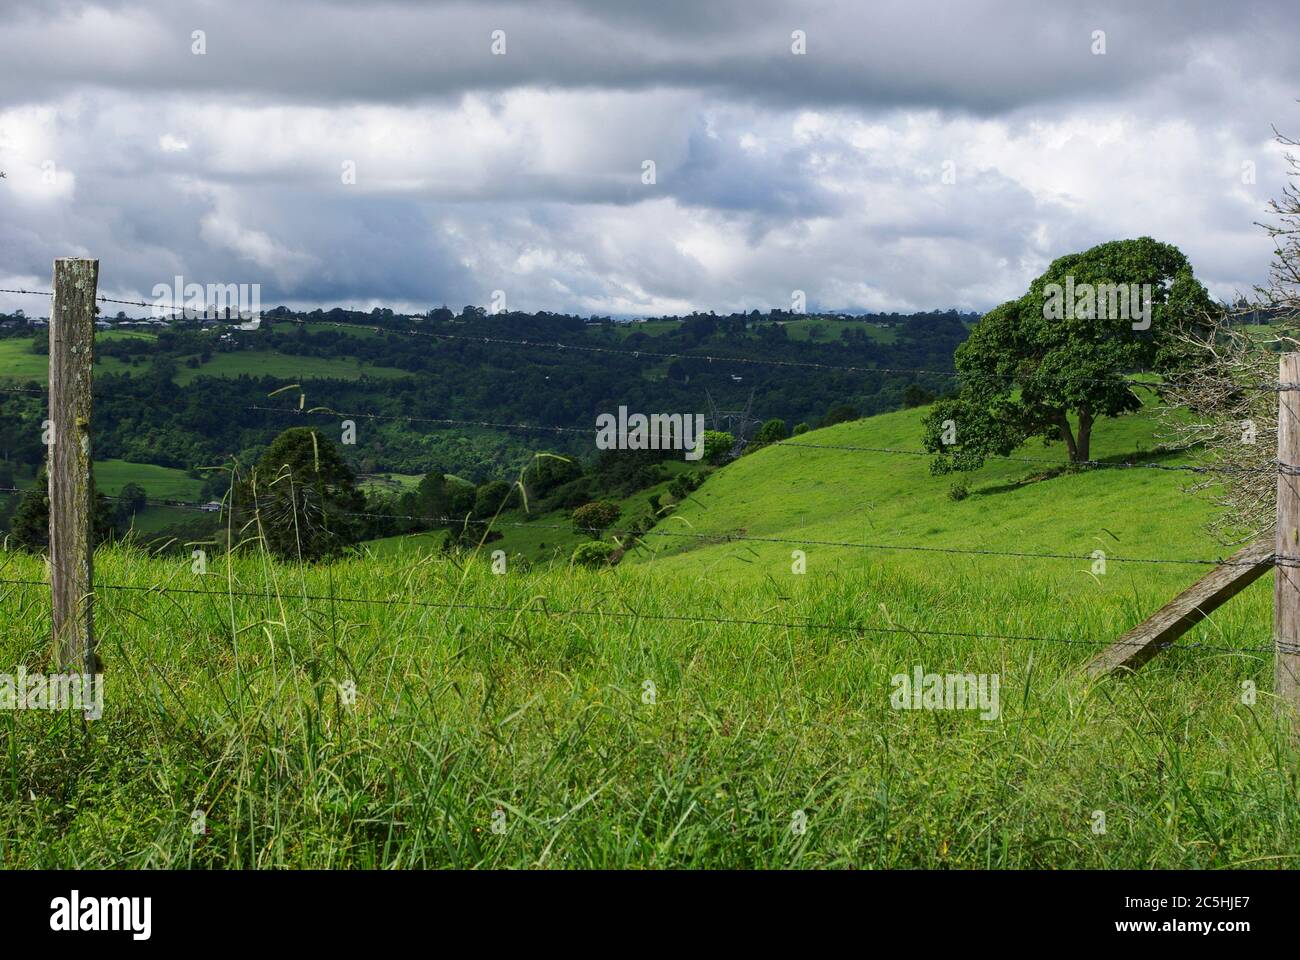 Overlooking Obi Obi Valley through barbed wire fence at Witta Maleny Stock Photo